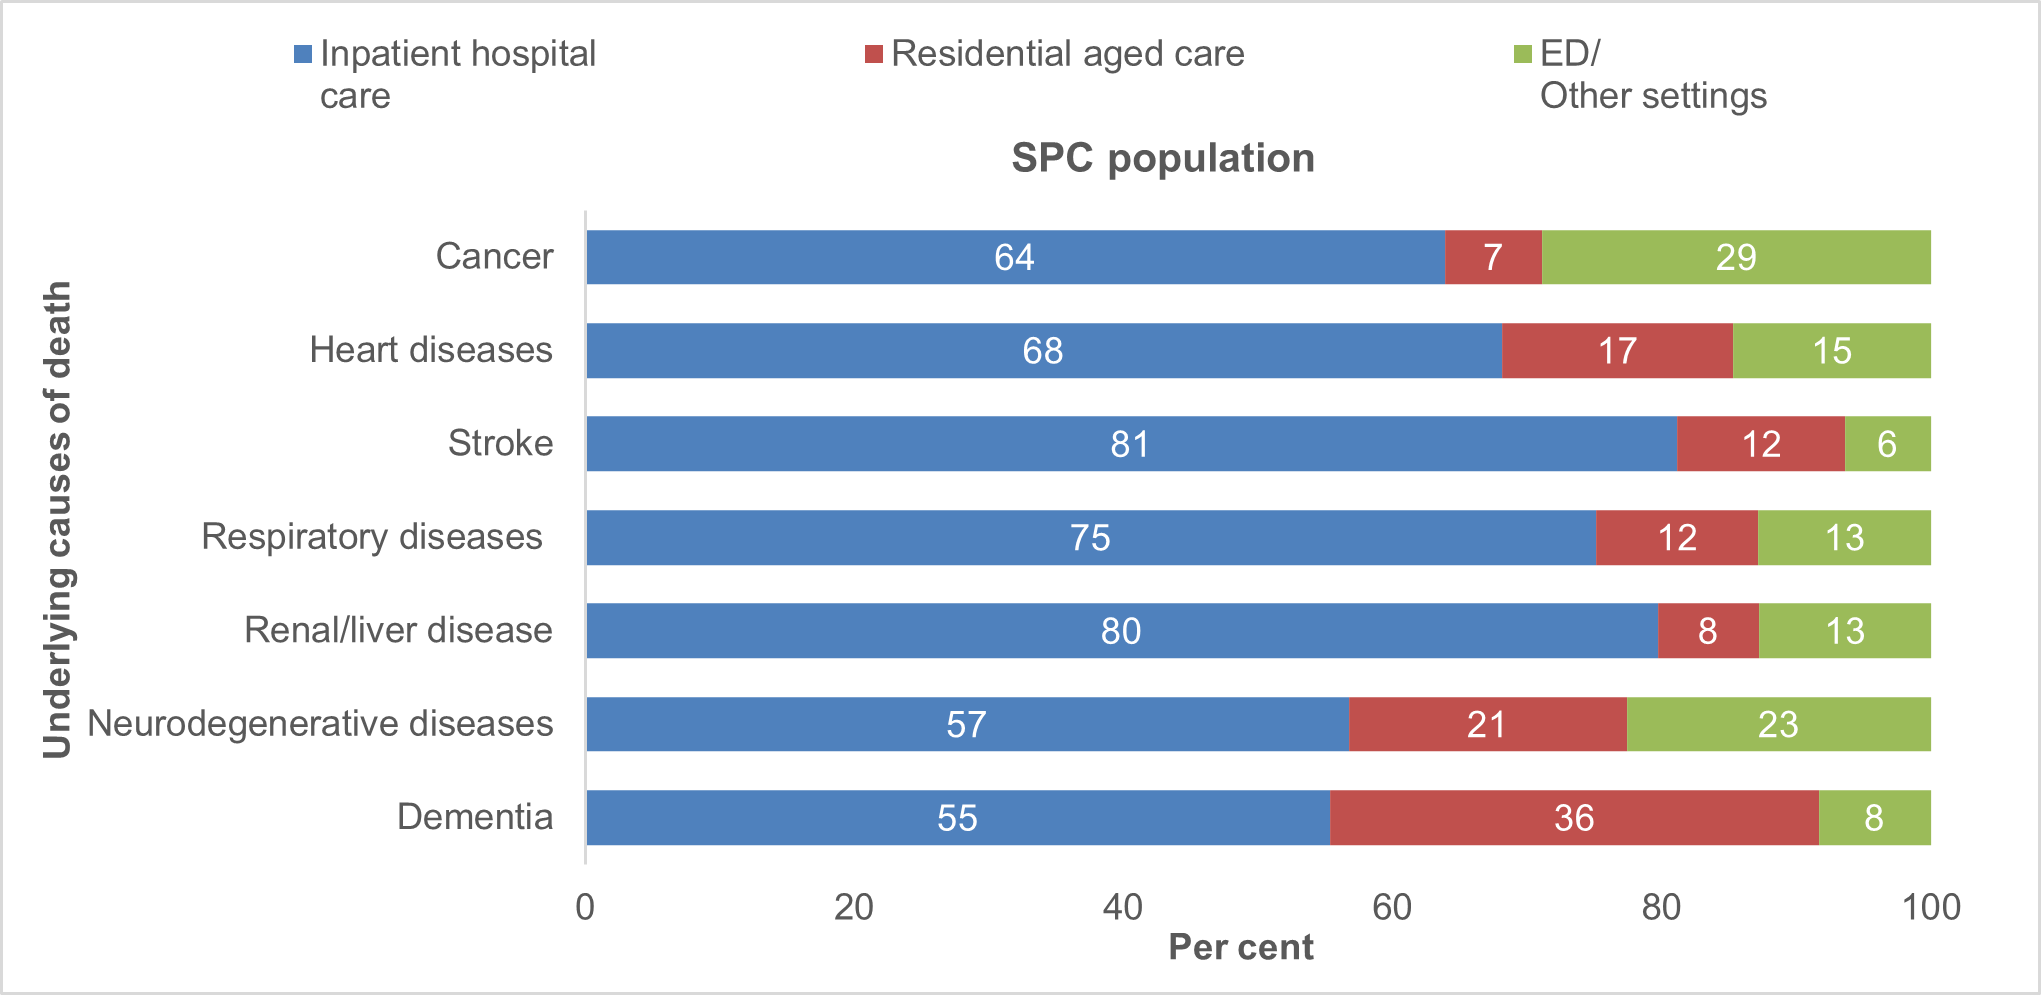 This figure shows the underlying cause of death, by place of death, for SPC and non SPC populations. Locations include inpatient hospital care, residential aged care and the emergency department.